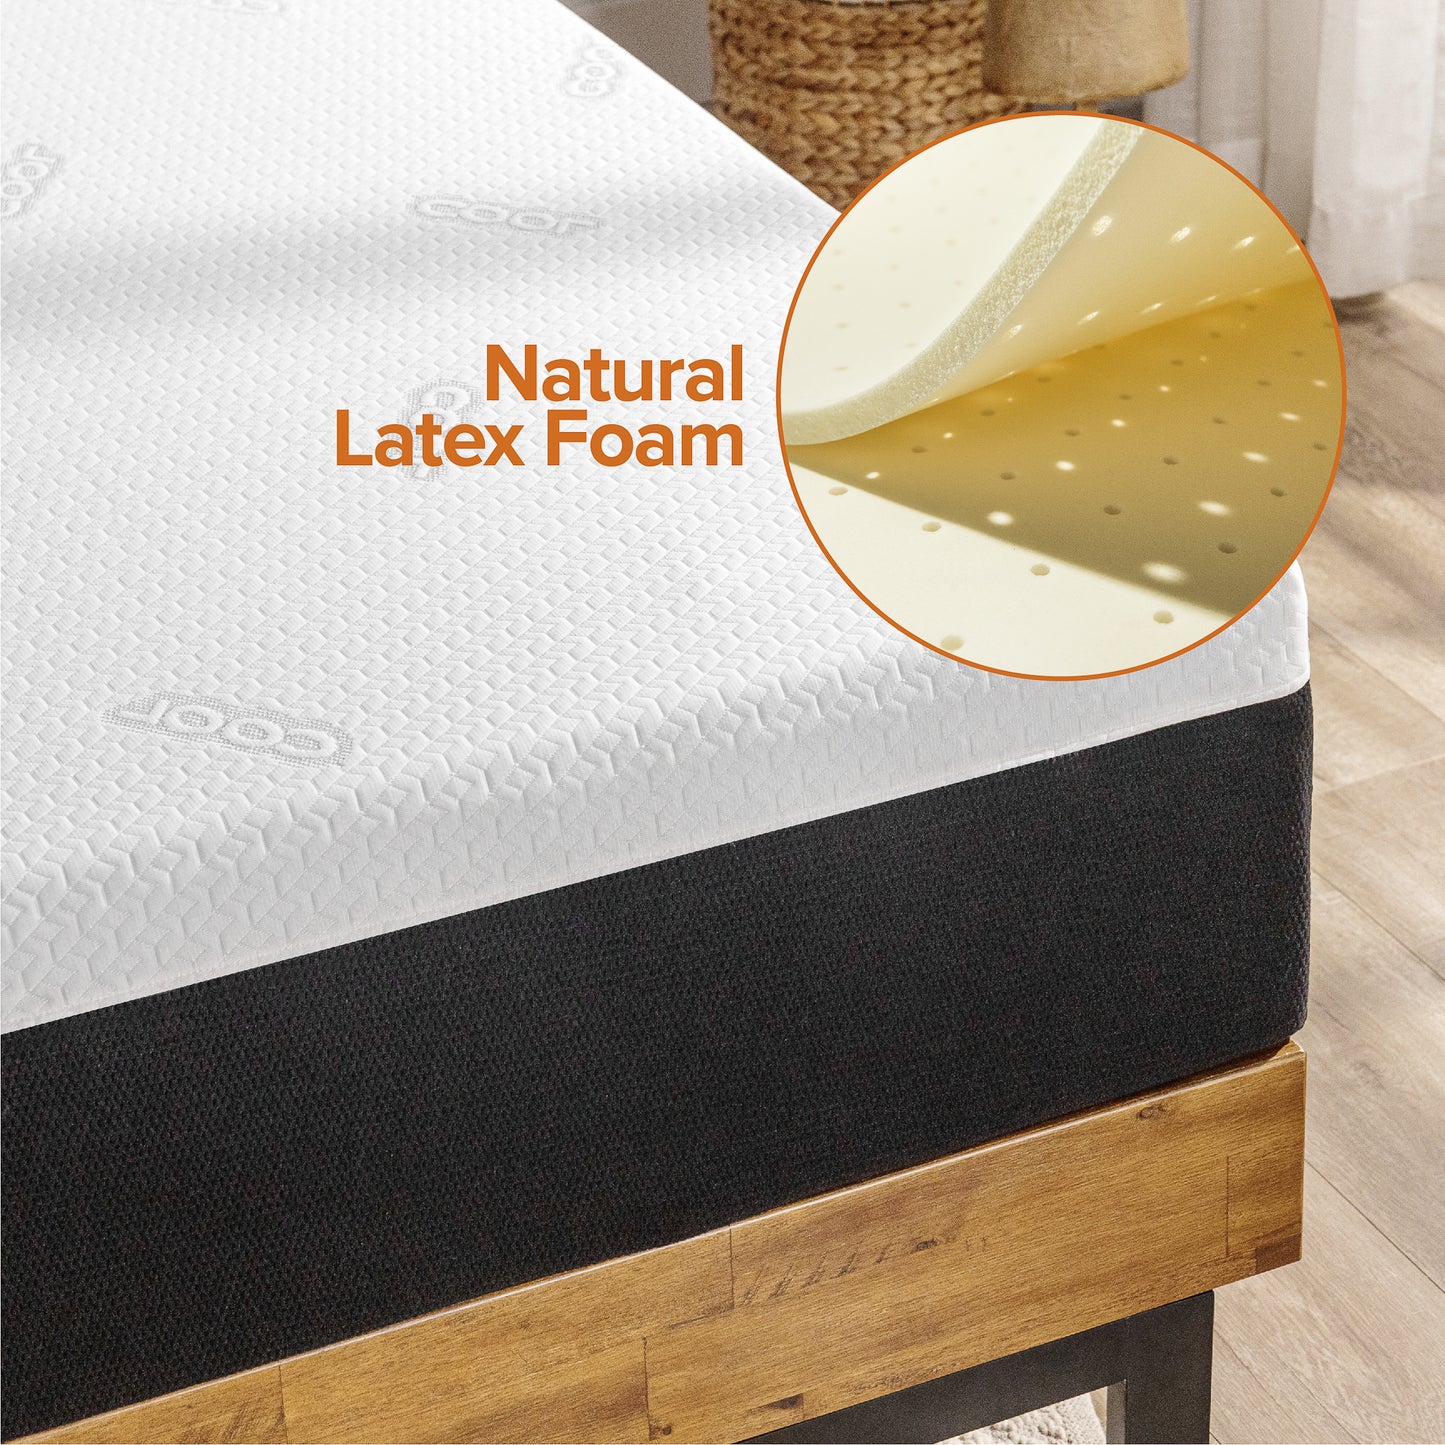 UltraCool Series iCoil 2.0 Natural Latex Smooth Top Mattress With Edge Support (Cool Fabric) 12"